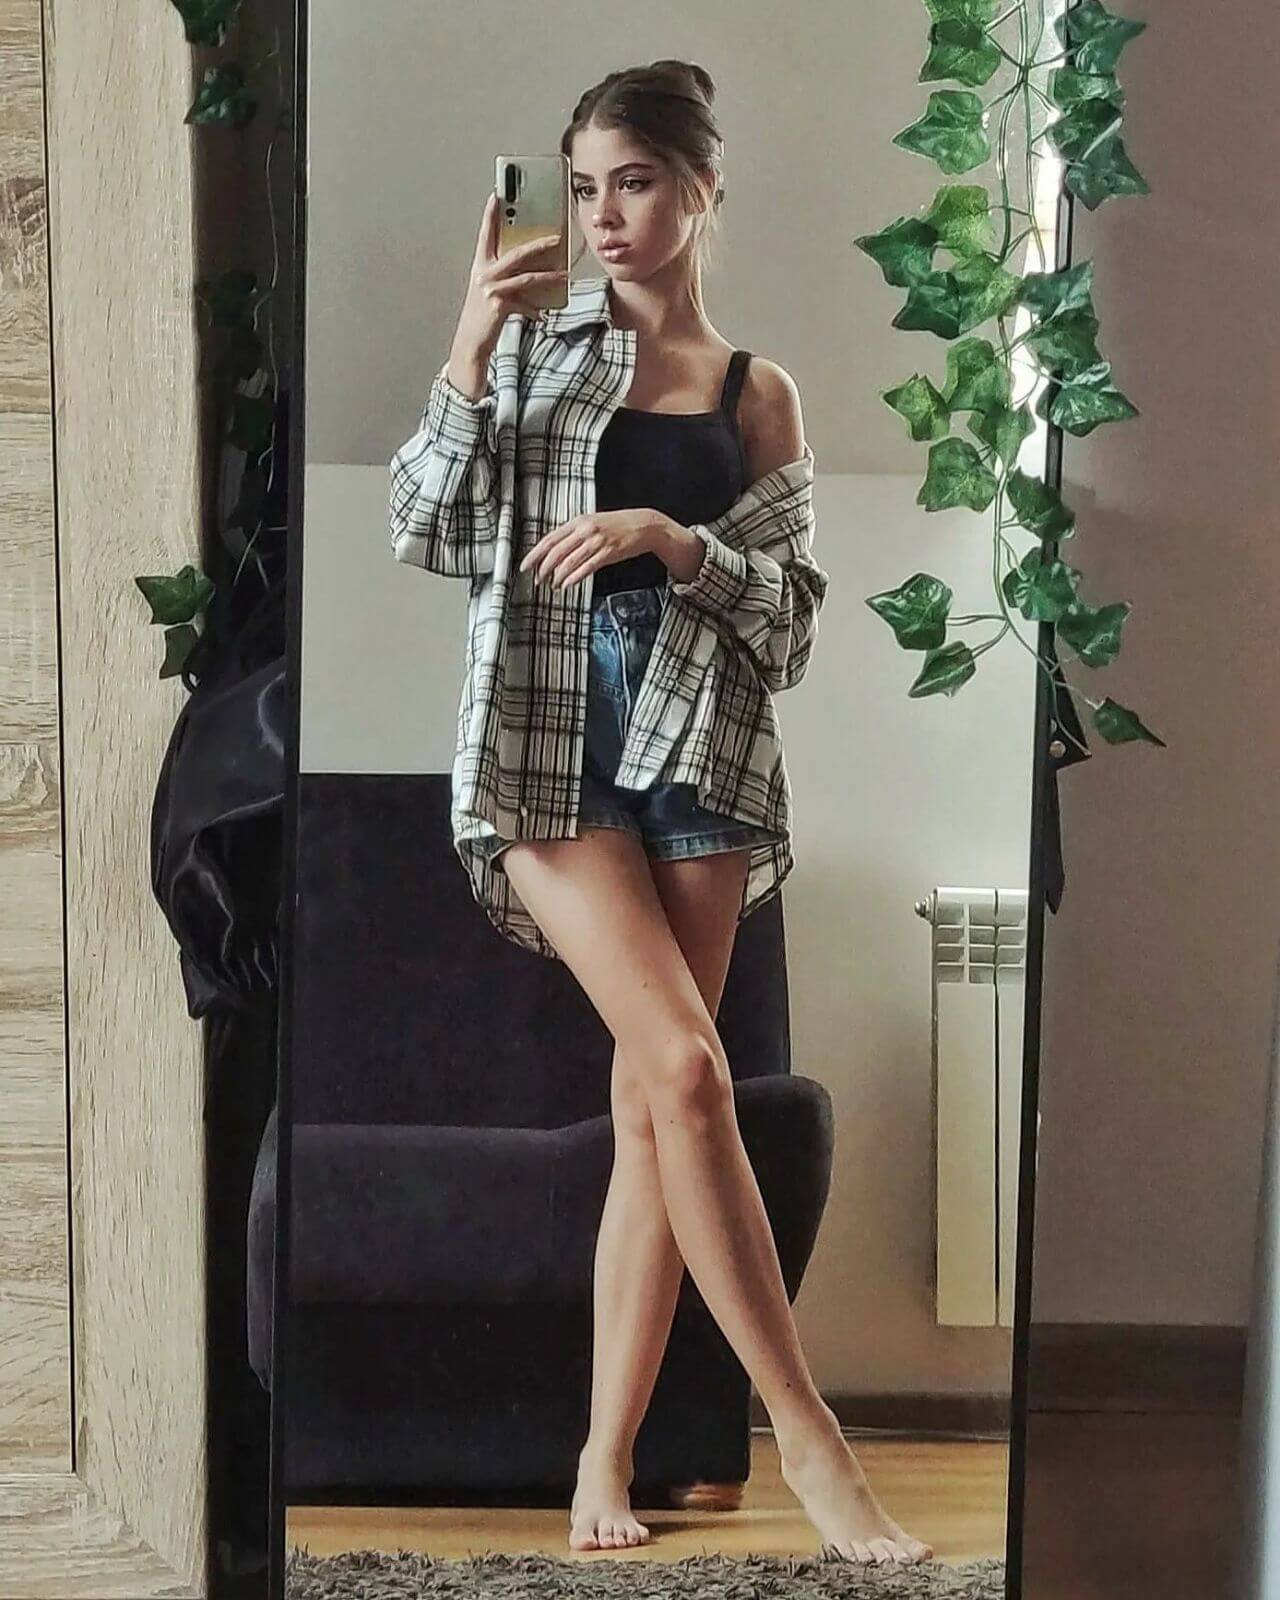 Agata Migdałek - In Denim Shorts & Black Crop Top With Opened Checks Shirt Outfits